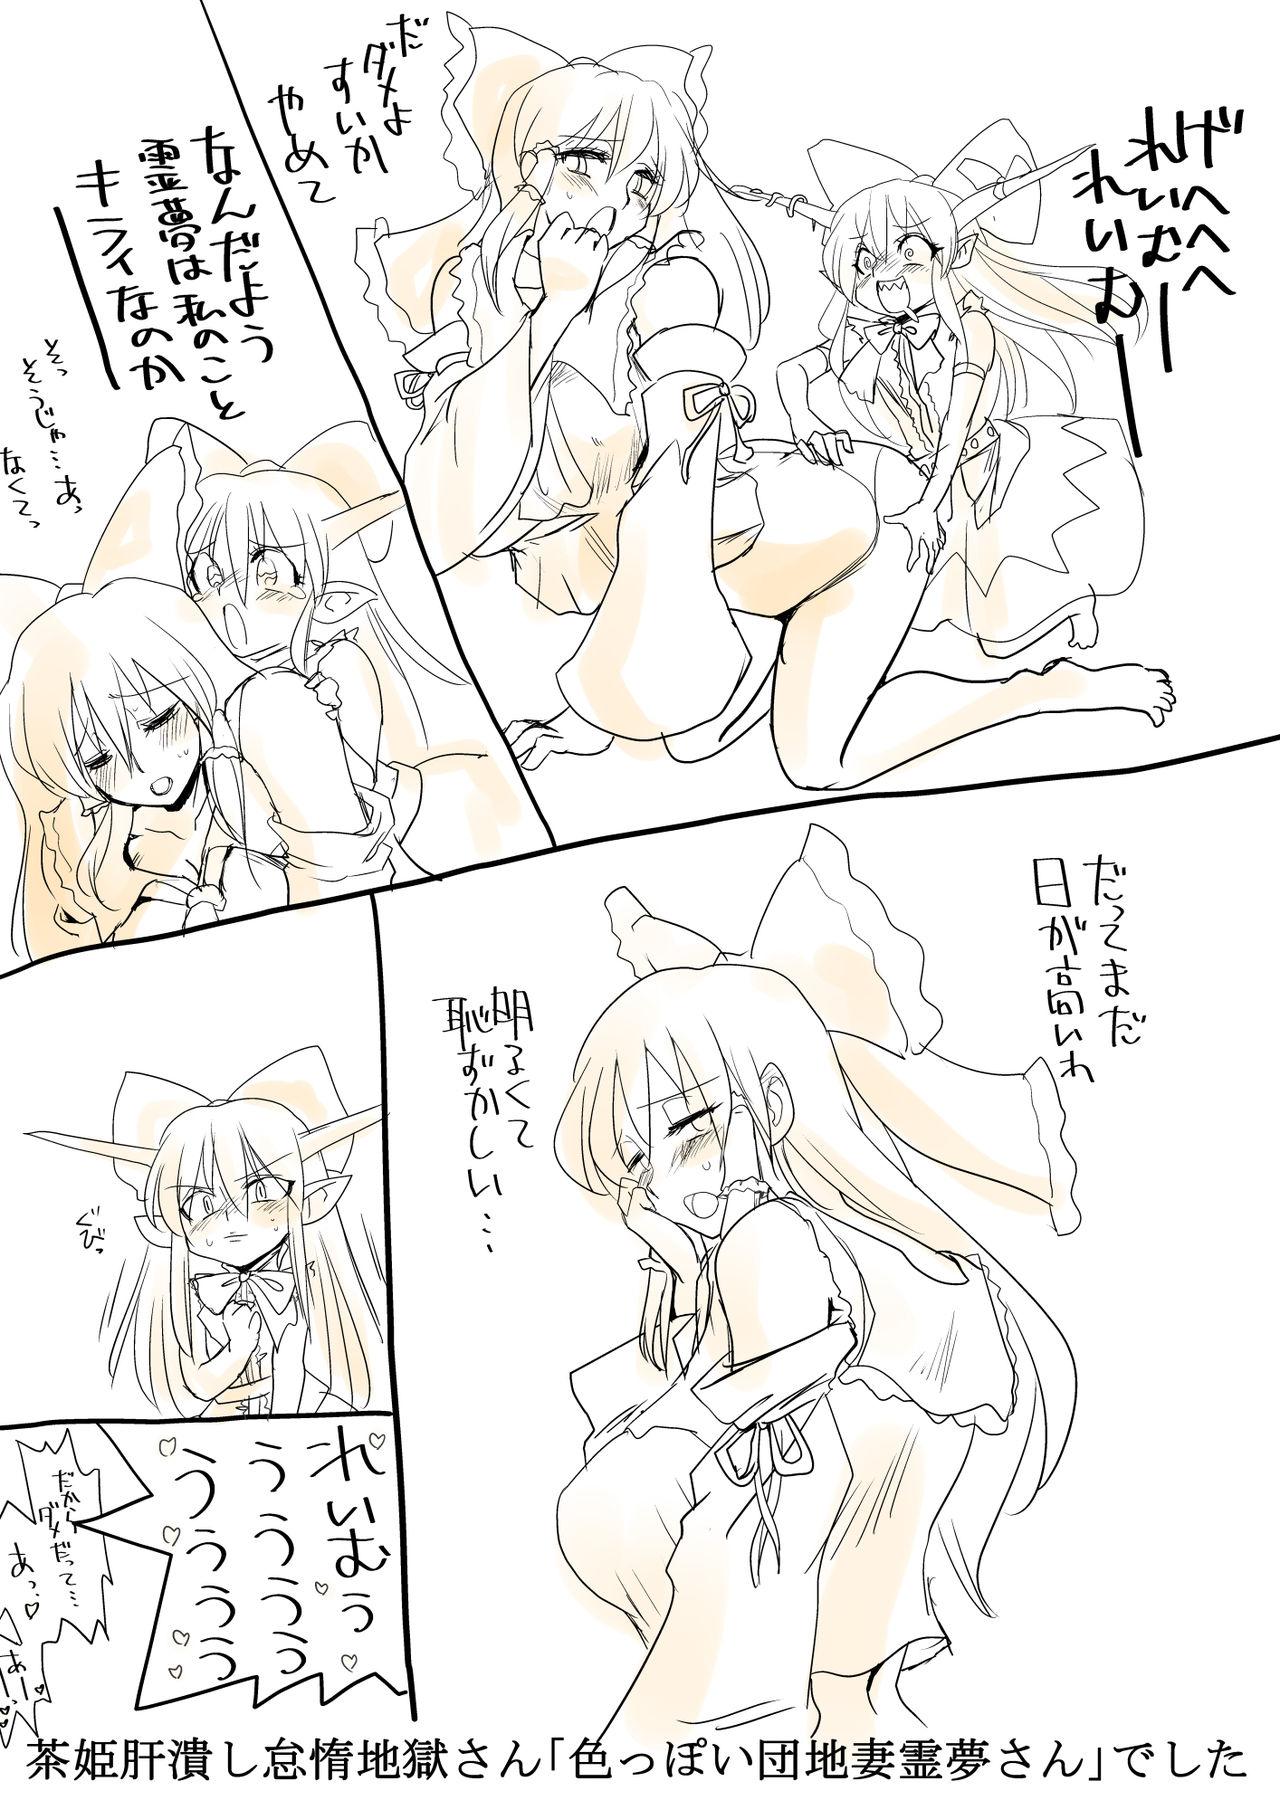 Perfect Butt Touhou Request Gashuu Sono 1 - Touhou project Stripping - Page 6